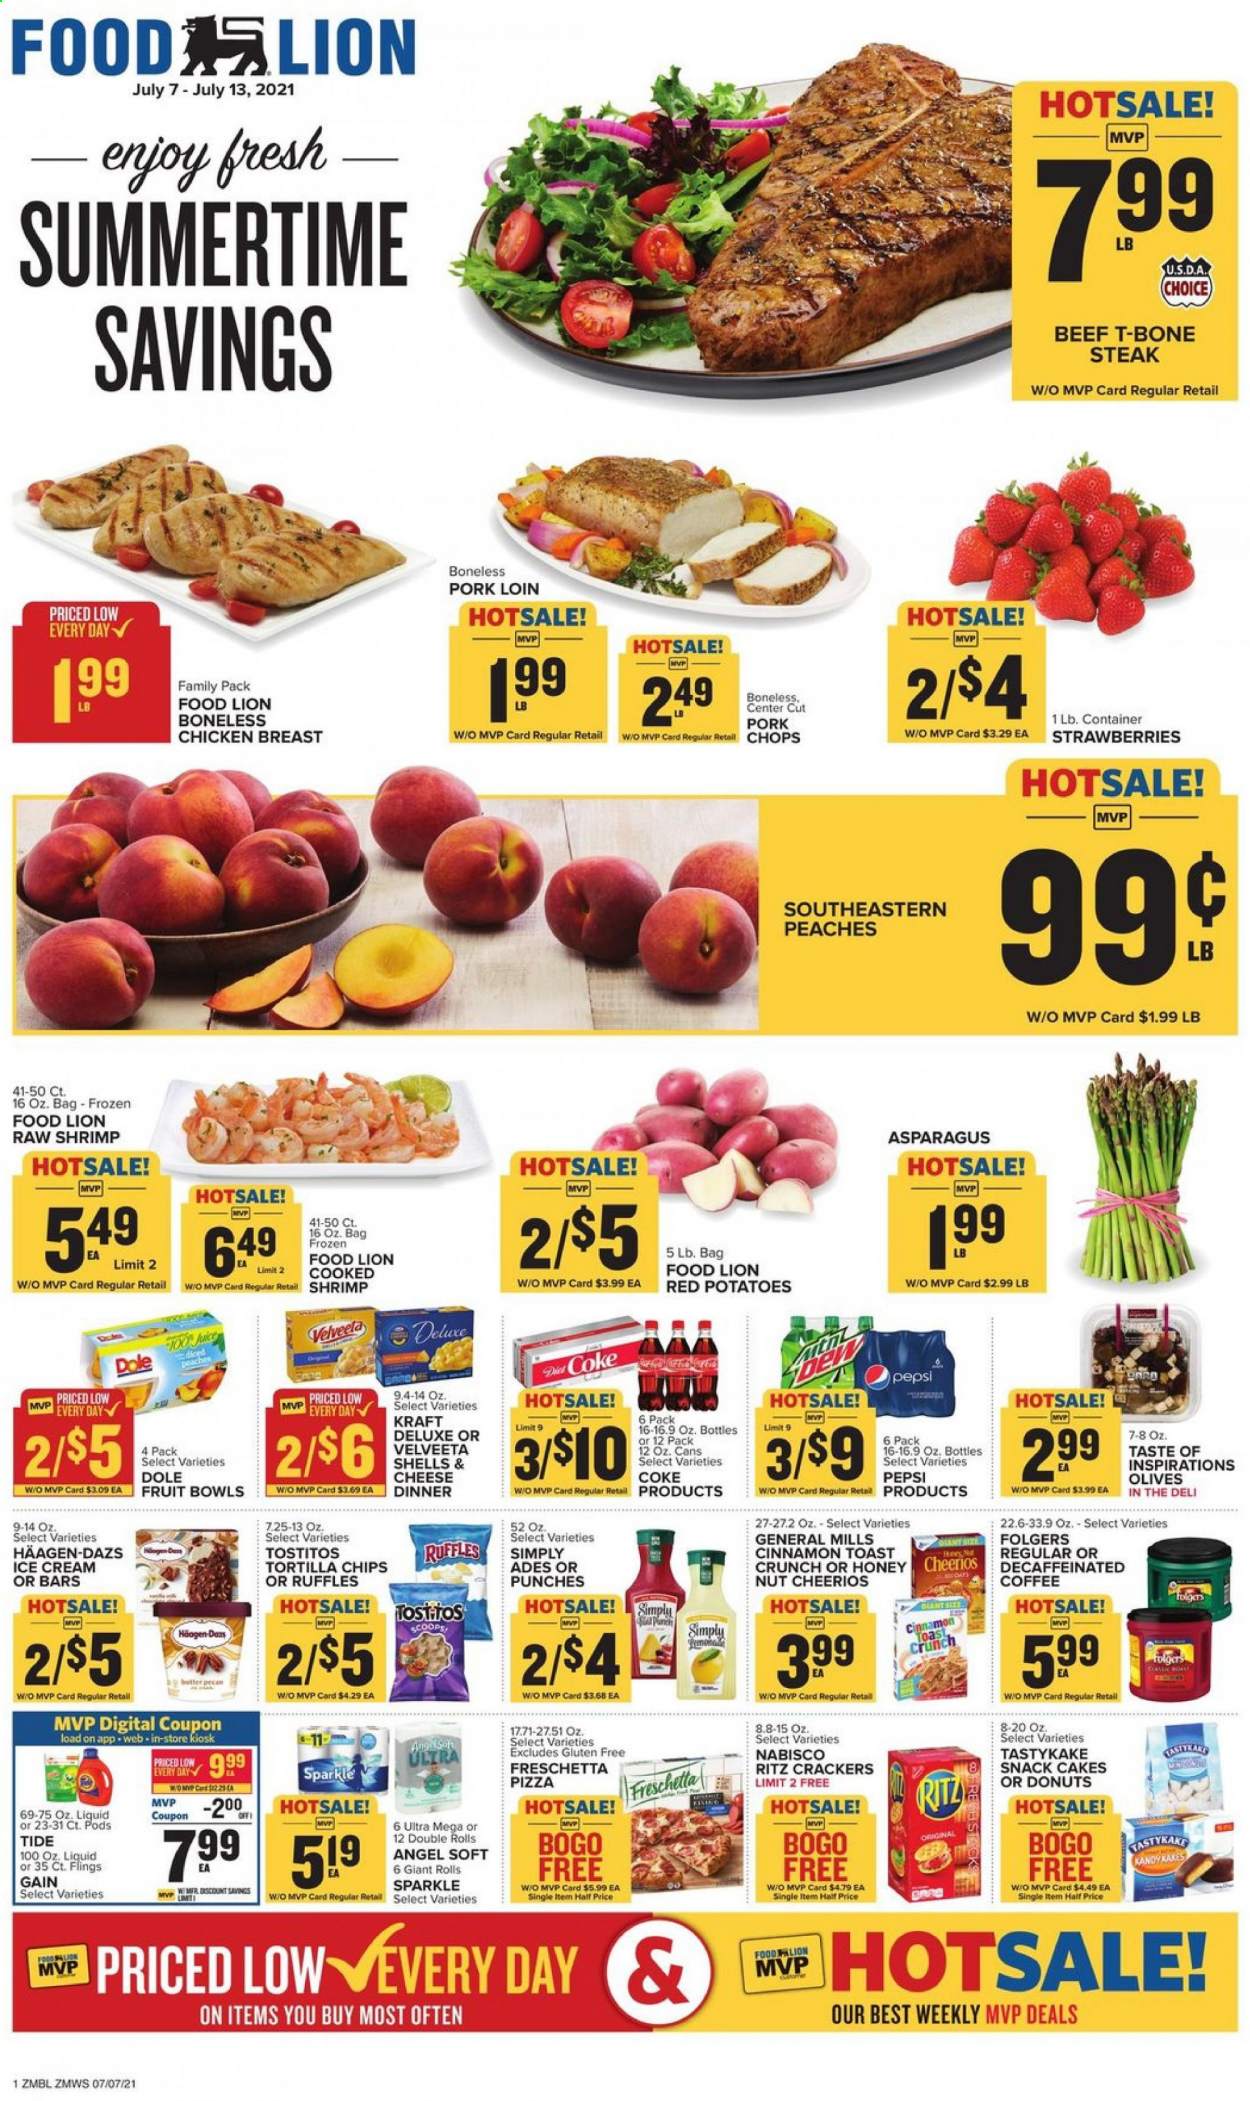 thumbnail - Food Lion Flyer - 07/07/2021 - 07/13/2021 - Sales products - cake, donut, asparagus, potatoes, Dole, red potatoes, strawberries, shrimps, pizza, Kraft®, ice cream, Häagen-Dazs, snack, crackers, RITZ, tortilla chips, Ruffles, Tostitos, oats, olives, Cheerios, cinnamon, Coca-Cola, Pepsi, coffee, Folgers, chicken breasts, beef meat, t-bone steak, steak, pork loin, pork meat, Gain, Tide. Page 1.